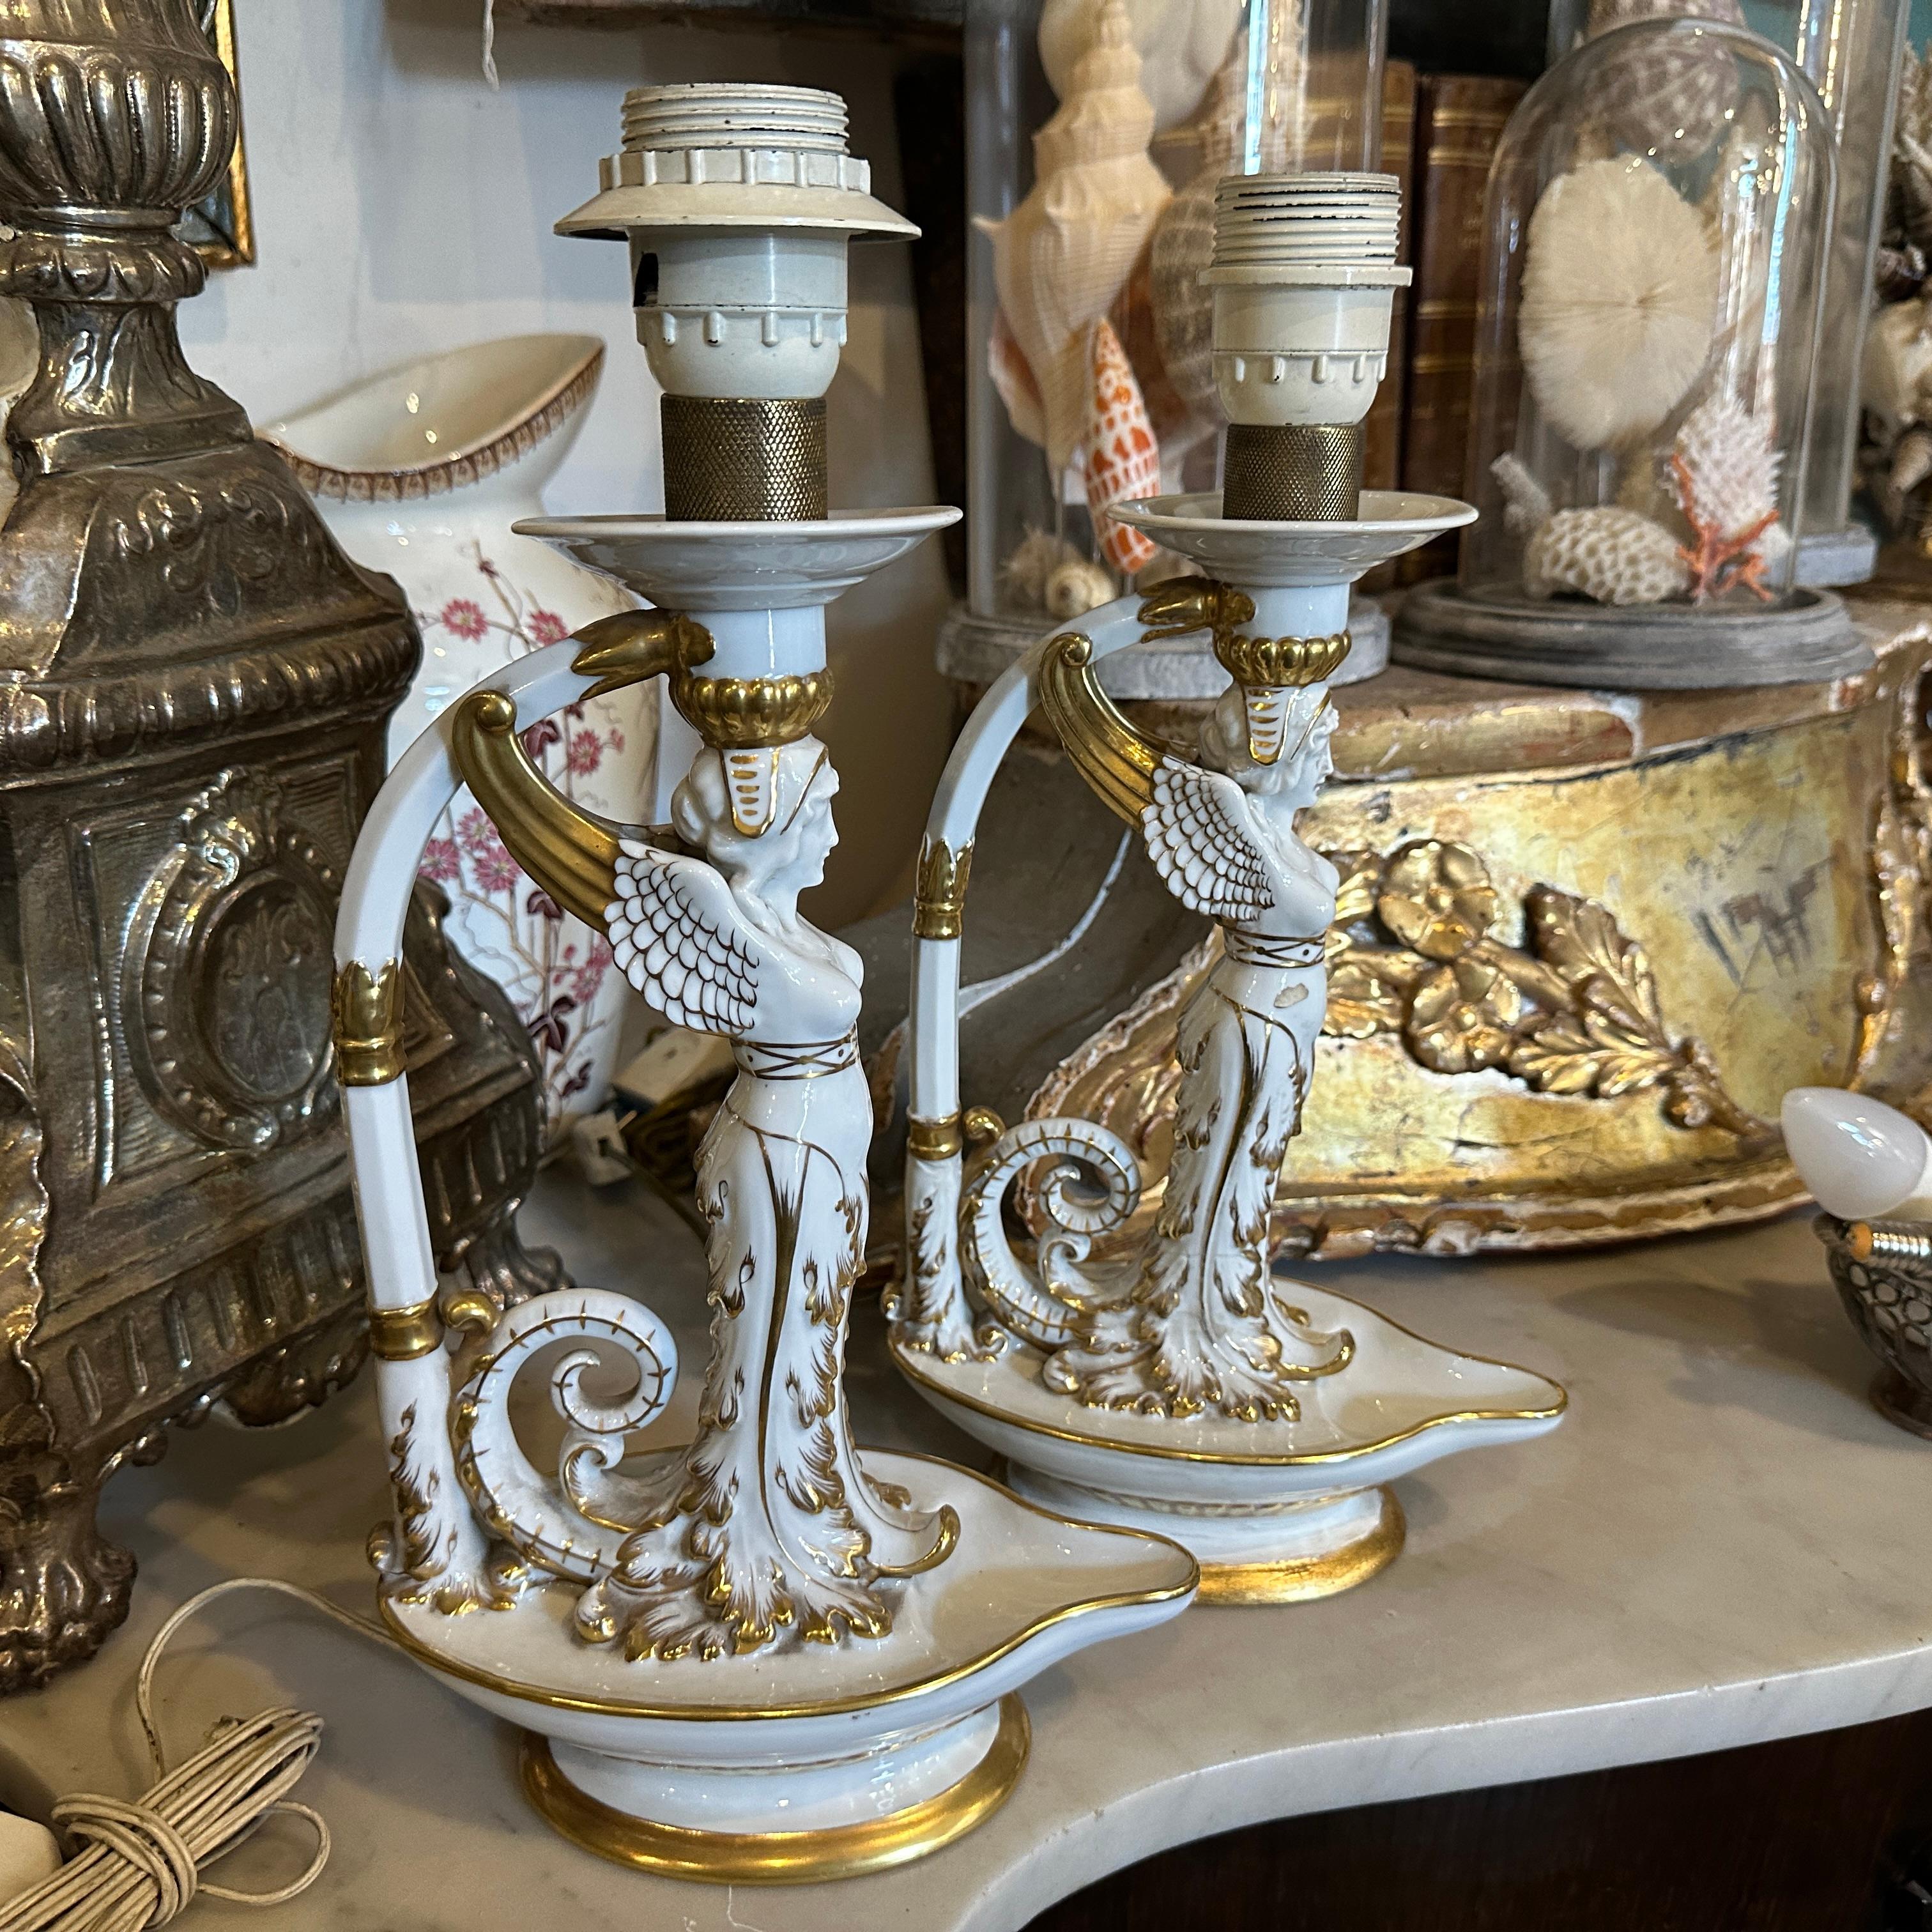 A pair of Capodimonte ceramic table lamps made in Napoli in the early 20th Century, they look like as neoclassical candleholders, are decorated in pure gold. they don't have lampshades.